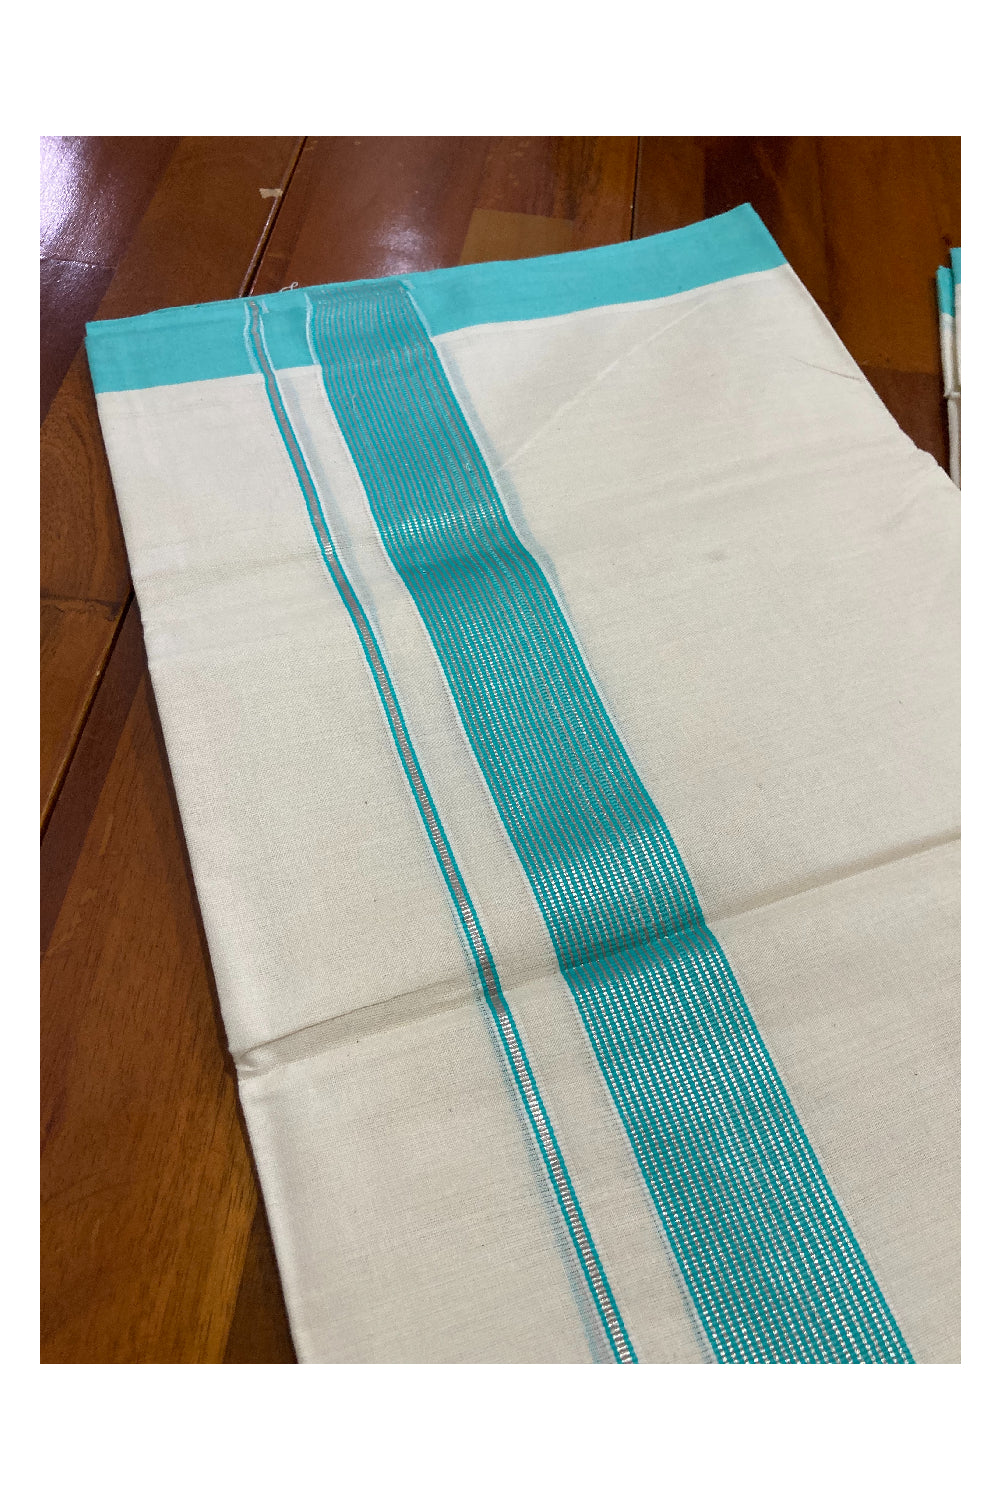 Off White Kerala Double Mundu with Silver Kasavu and Turquoise Line Border (South Indian Dhoti)